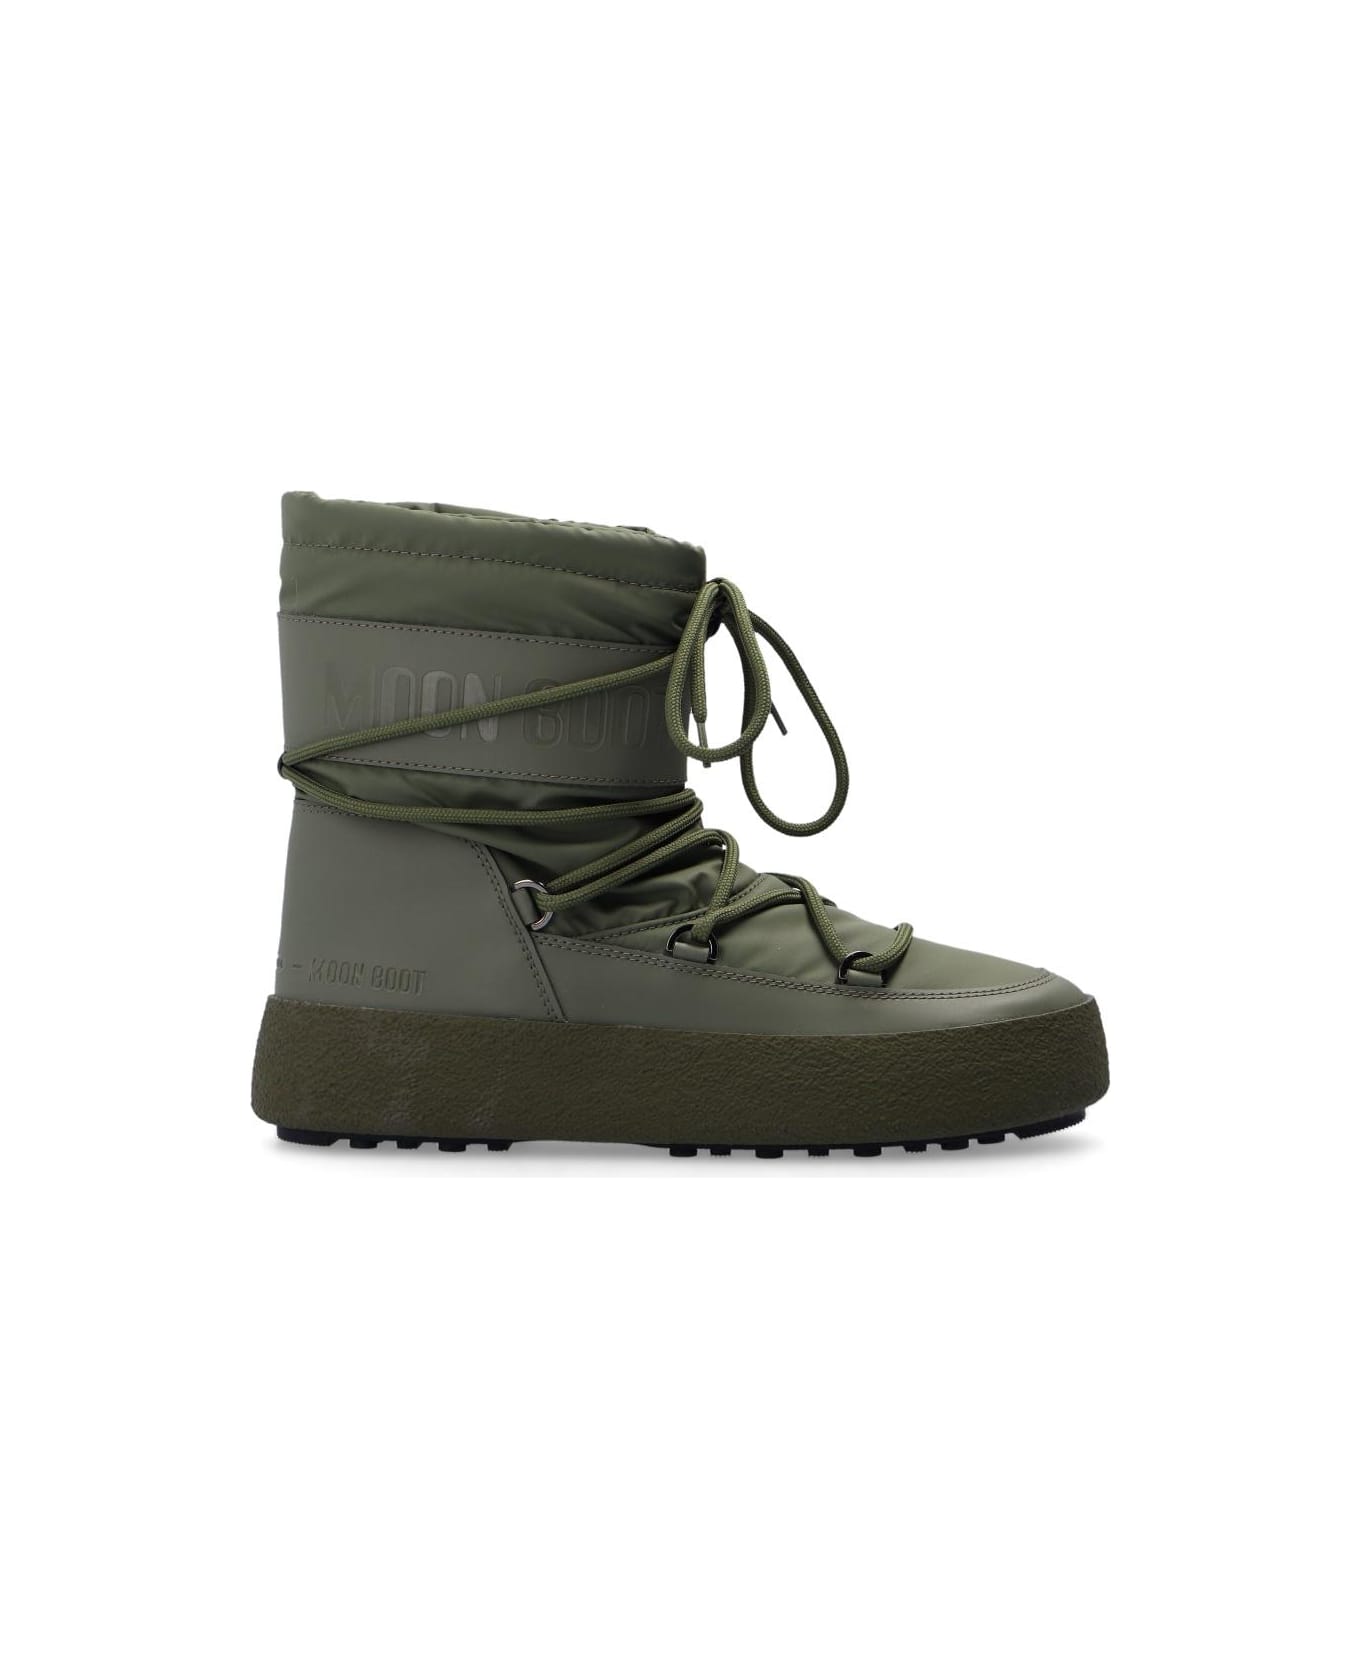 Moon Boot 'mtrack' Snow Boots - GREEN ブーツ